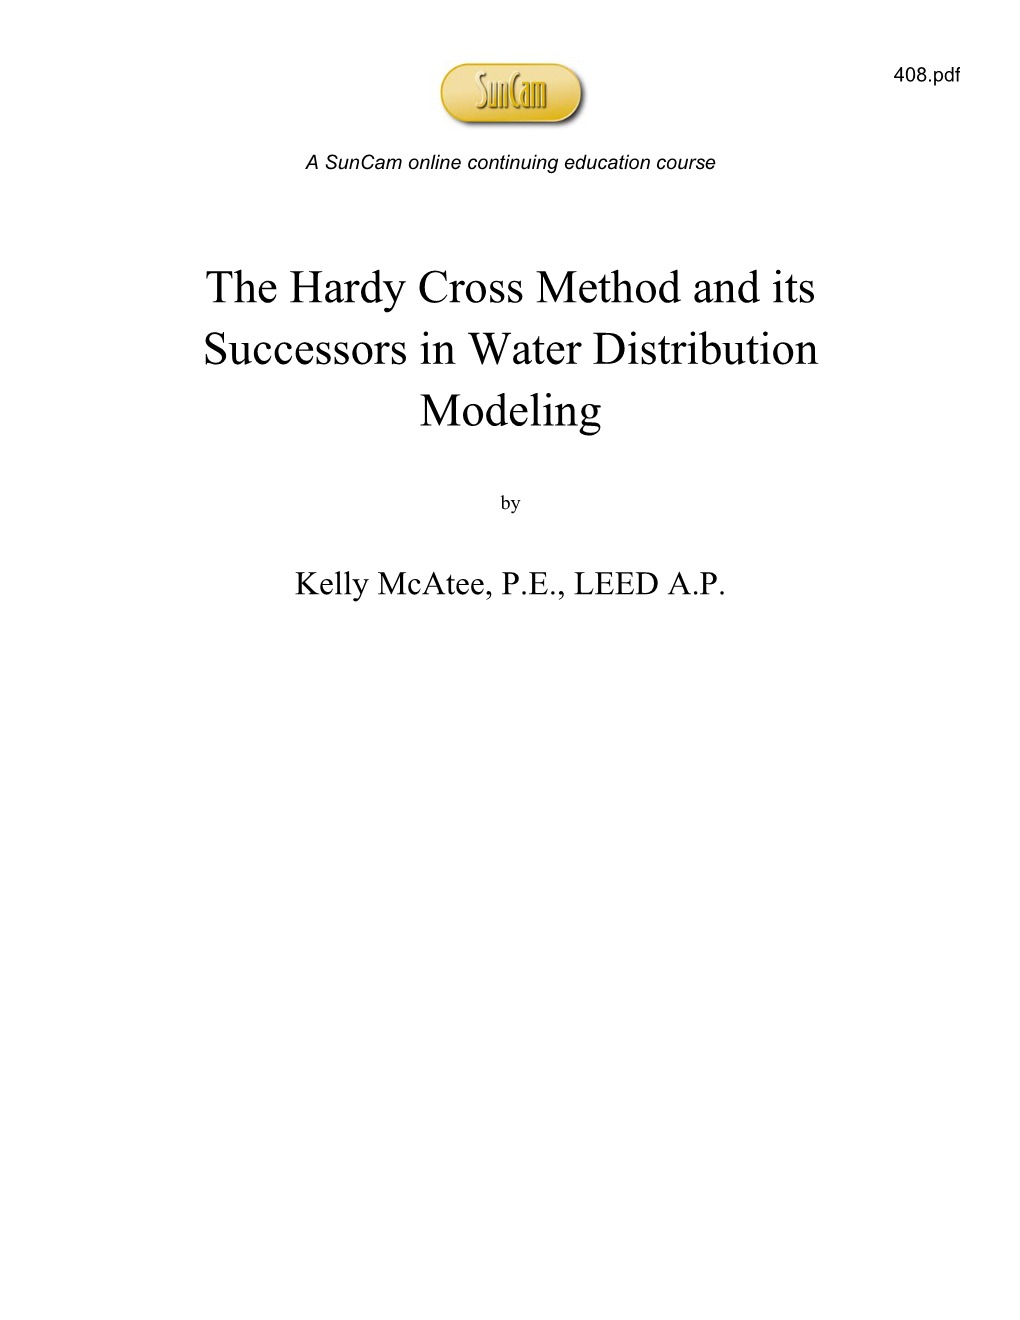 Hardy Cross Method and Its Successors in Water Distribution Modeling